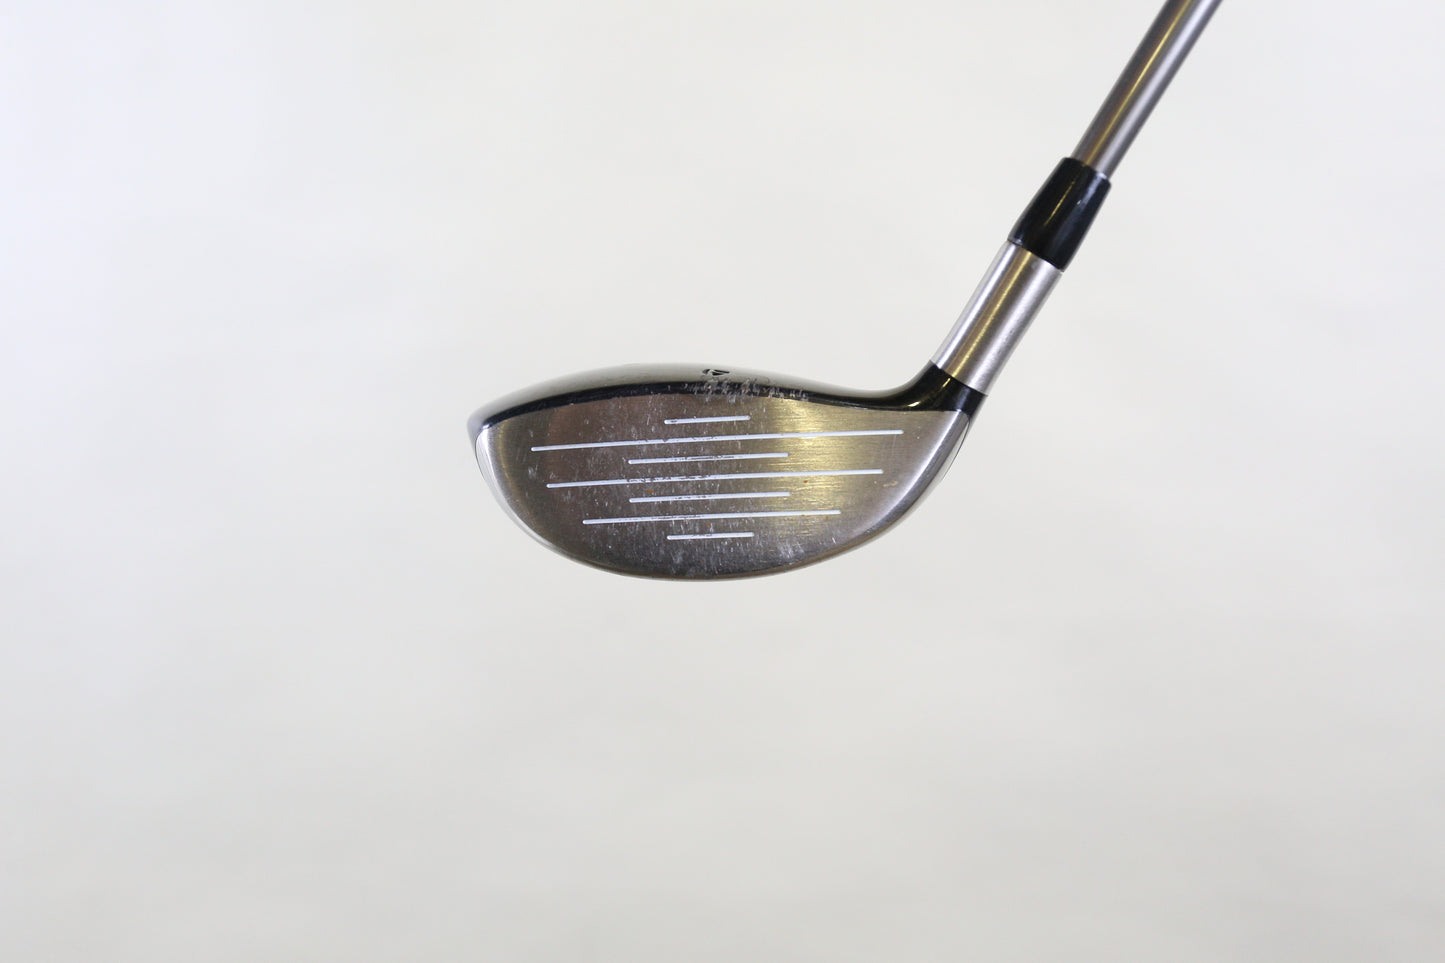 Used TaylorMade r7 Steel 3-Wood - Right-Handed - 15 Degrees - Stiff Flex